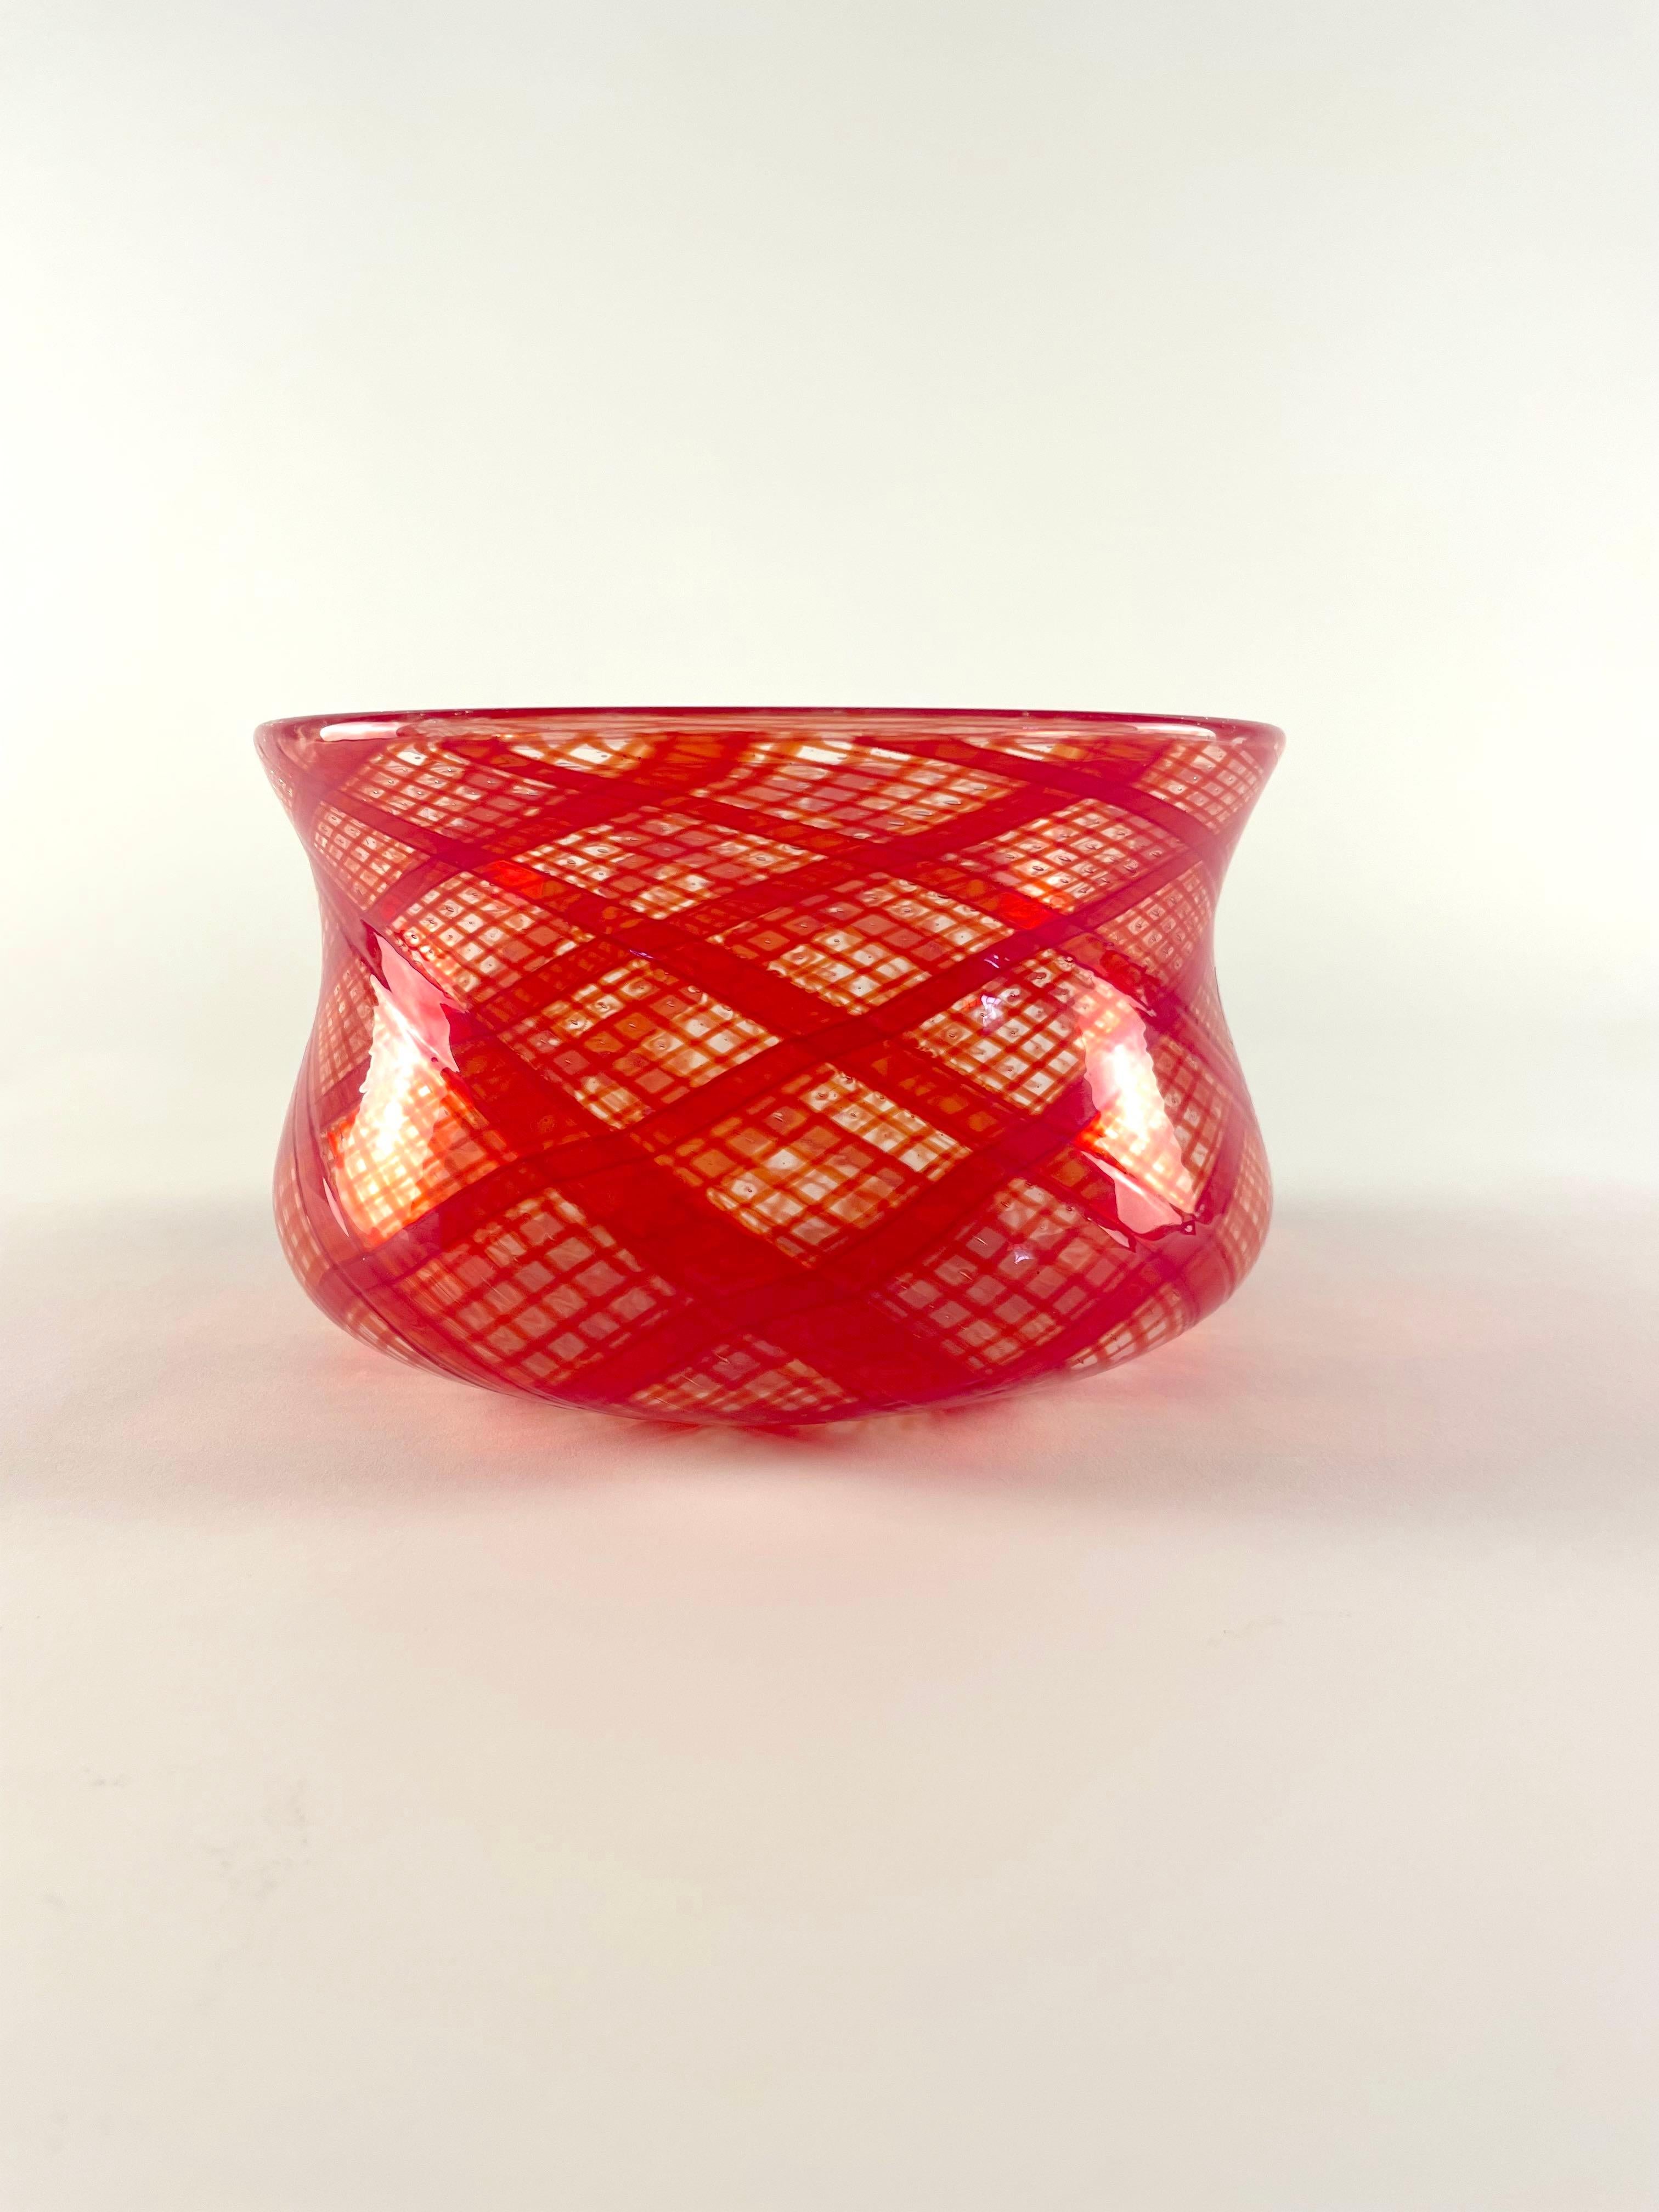 This vessel is a Murano glass masterpiece realized by maestro Bruno Fornasier for Fratelli Toso glass factory. It is realized by using a complicated technique which requires great manufacturer skills. The technique you is called 